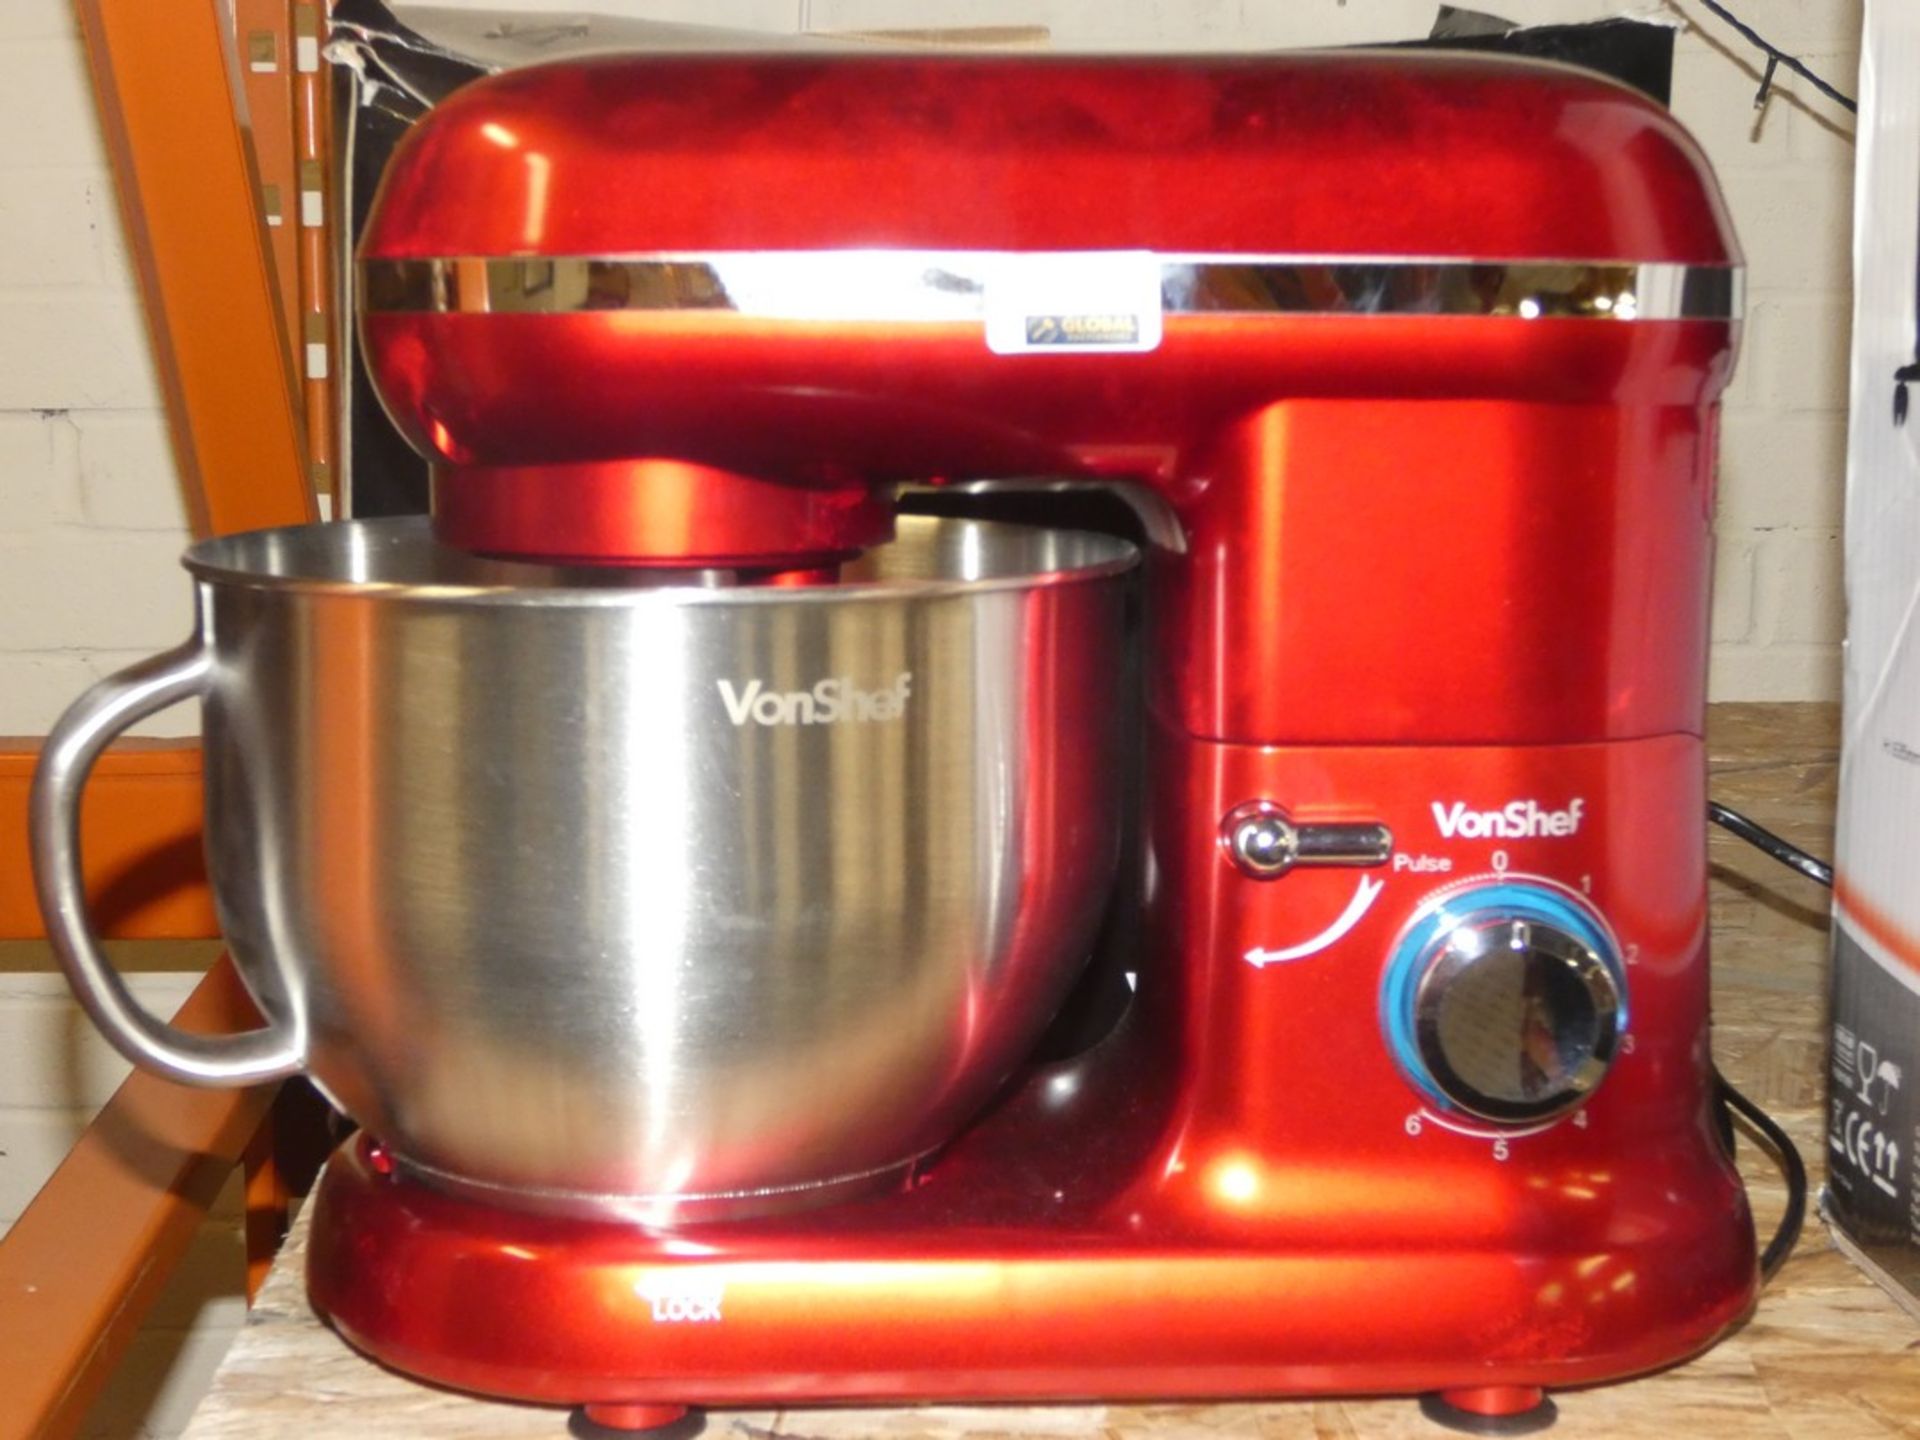 Vonshelf Mixer RRP £80 (Viewing or Appraisals Highly Recommended)